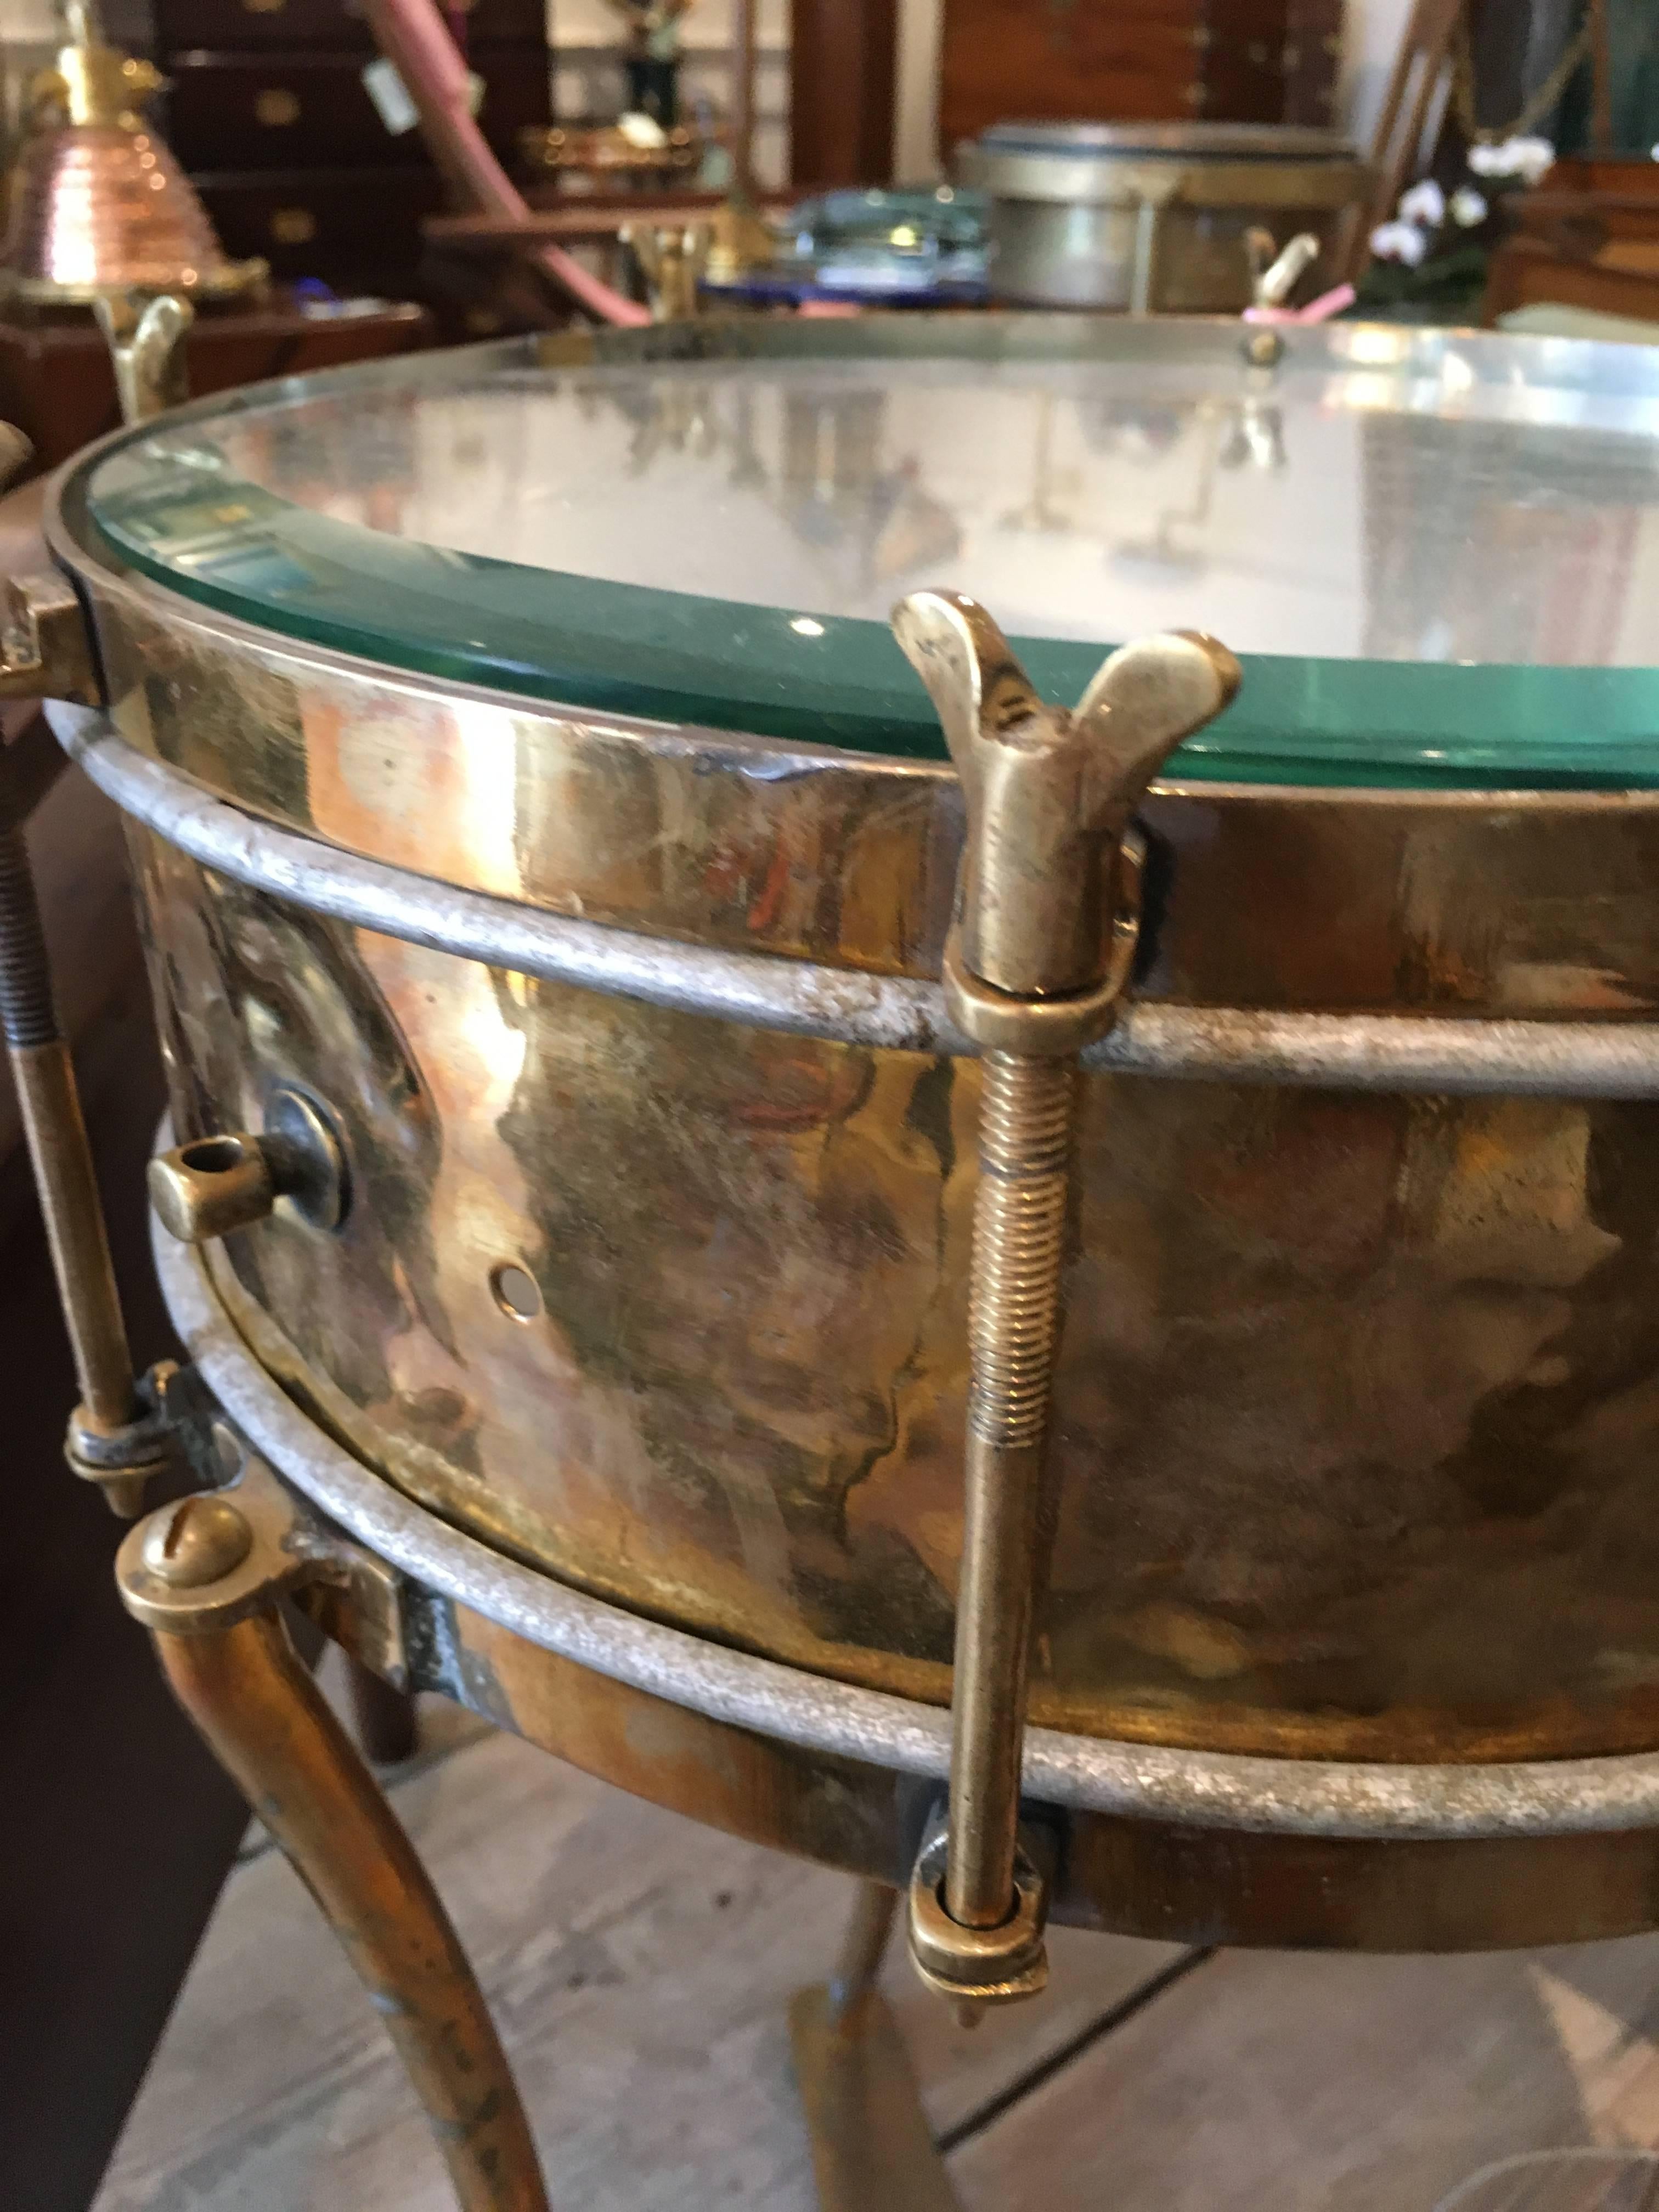 20th Century Solid Brass Military or Marching Band Snare Drum Converted to Table, Early 1900s